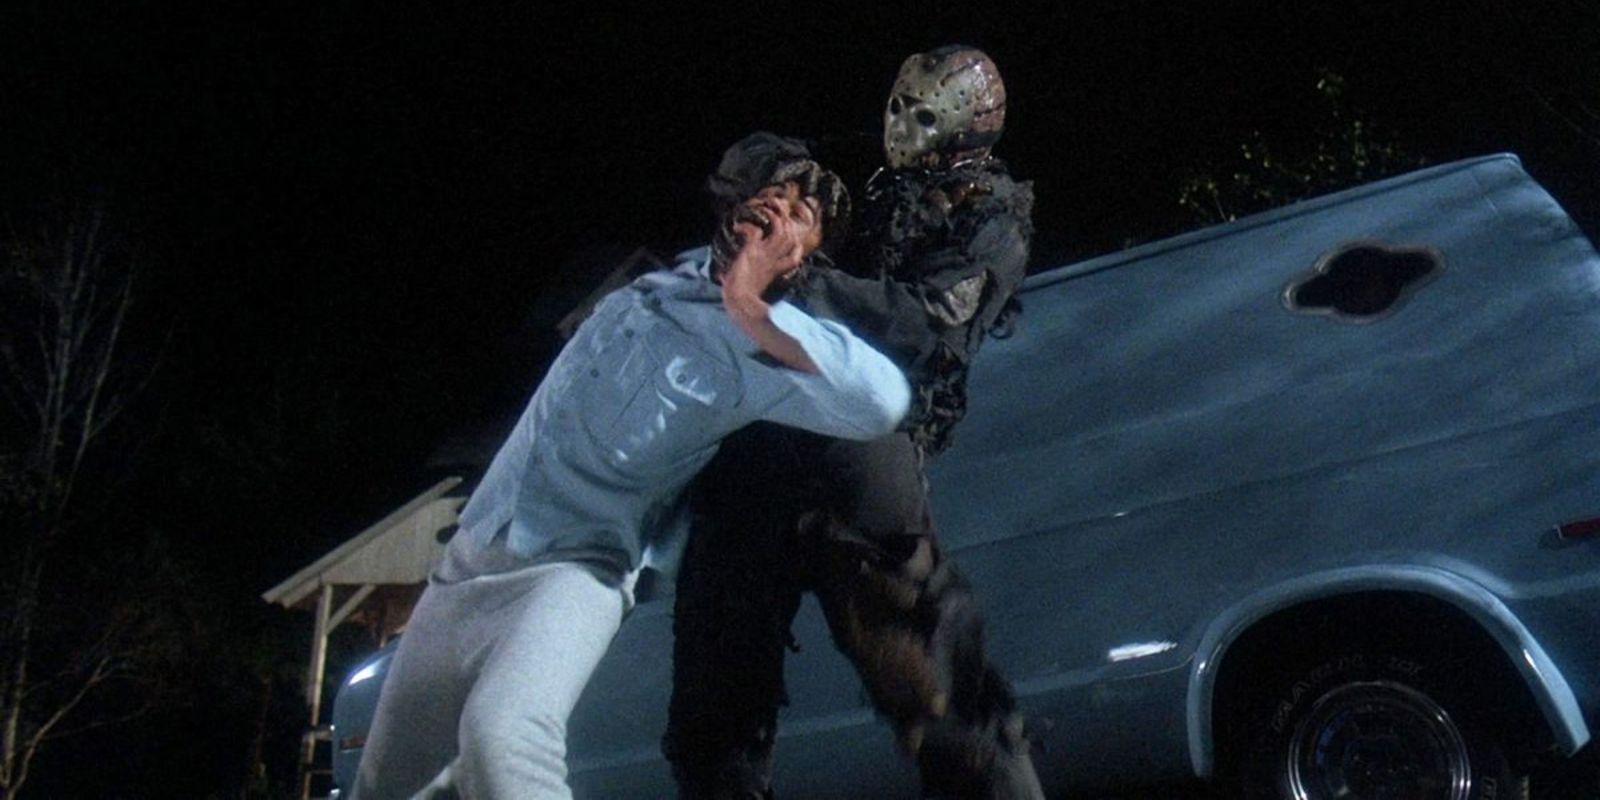 Jason Voorhees Crushing Ben's Skull - Friday The 13th Part VII: The New Blood